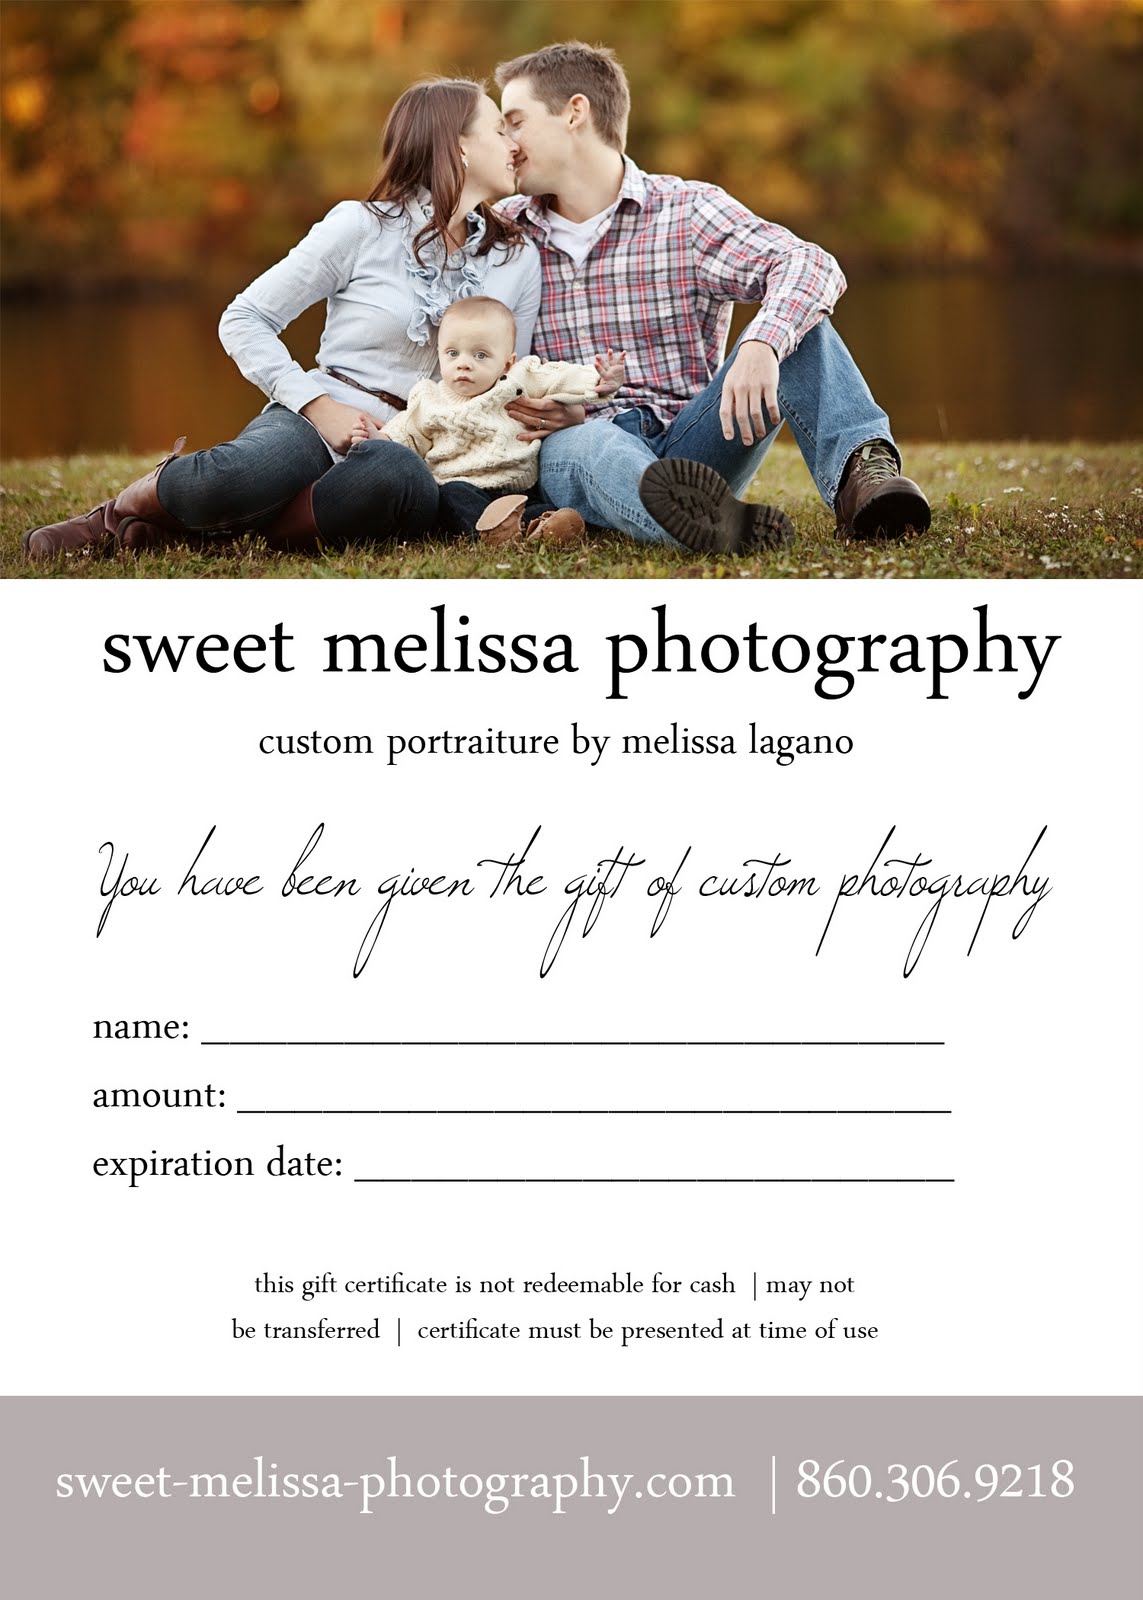 Sweet Melissa Photography: Holiday Gift Ideas- gift certificates!